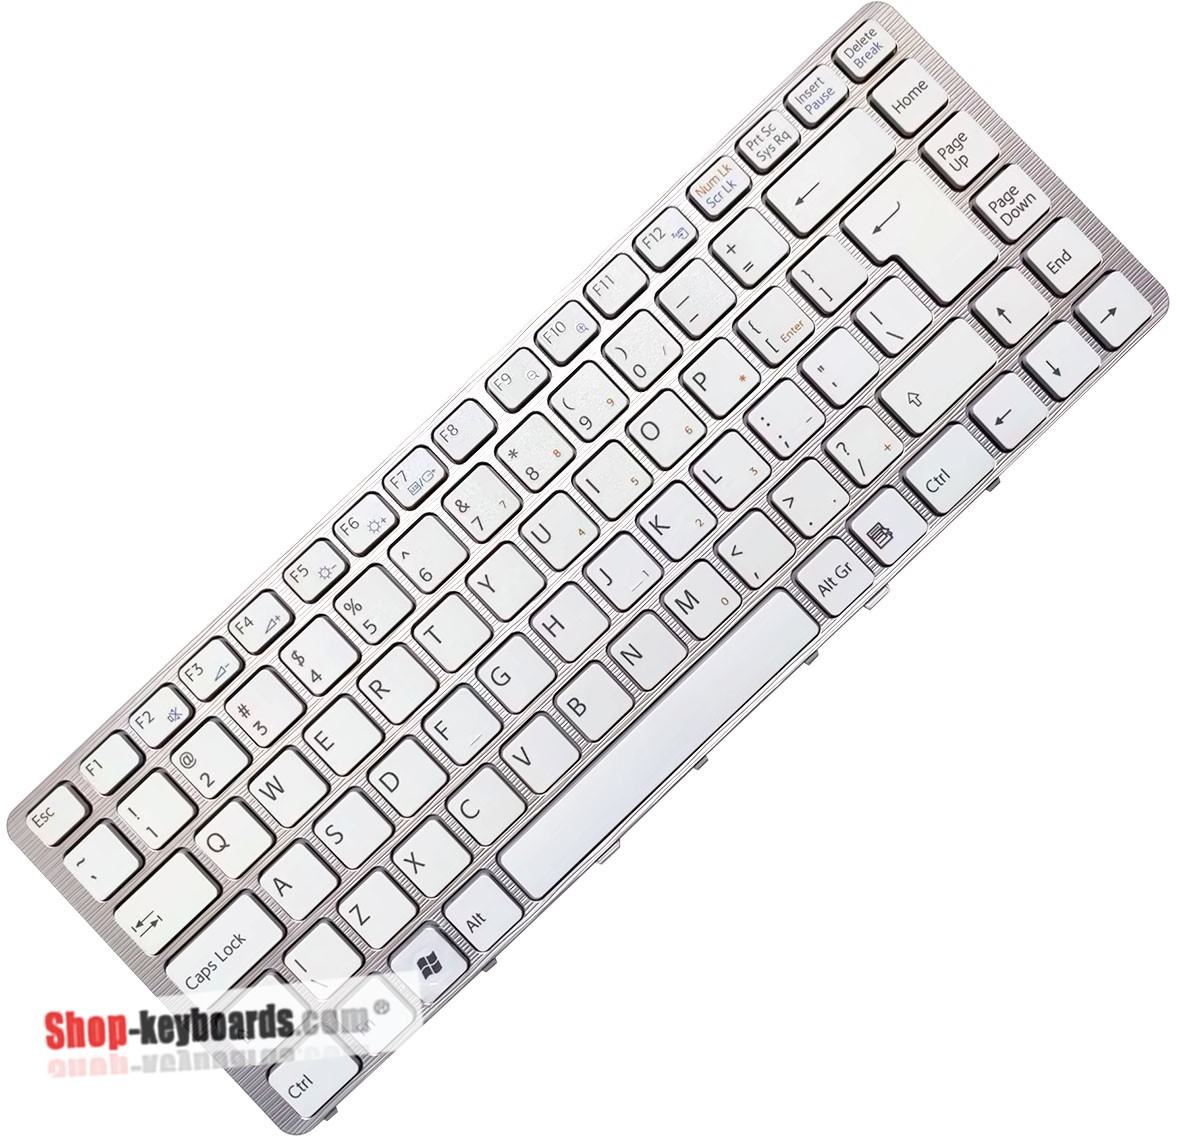 Sony VAIO VGN-NW240D Keyboard replacement